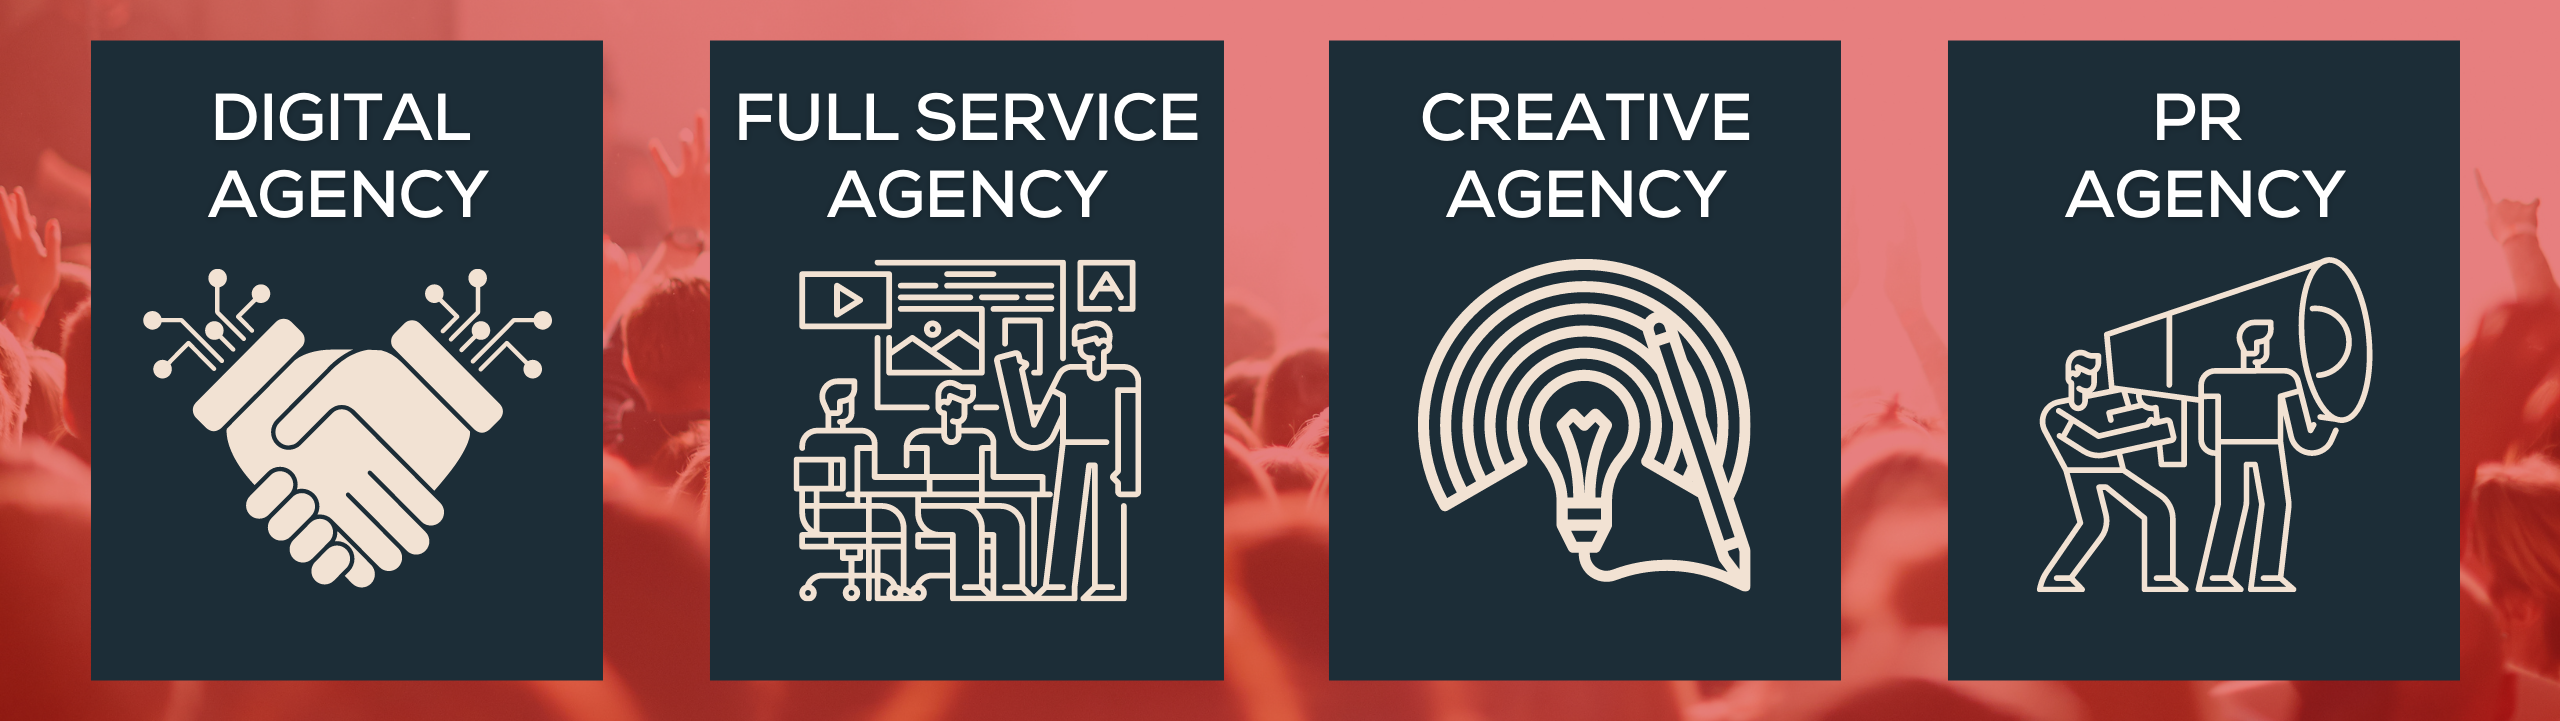 Infographic depicting the different types of marketing and advertising agencies.